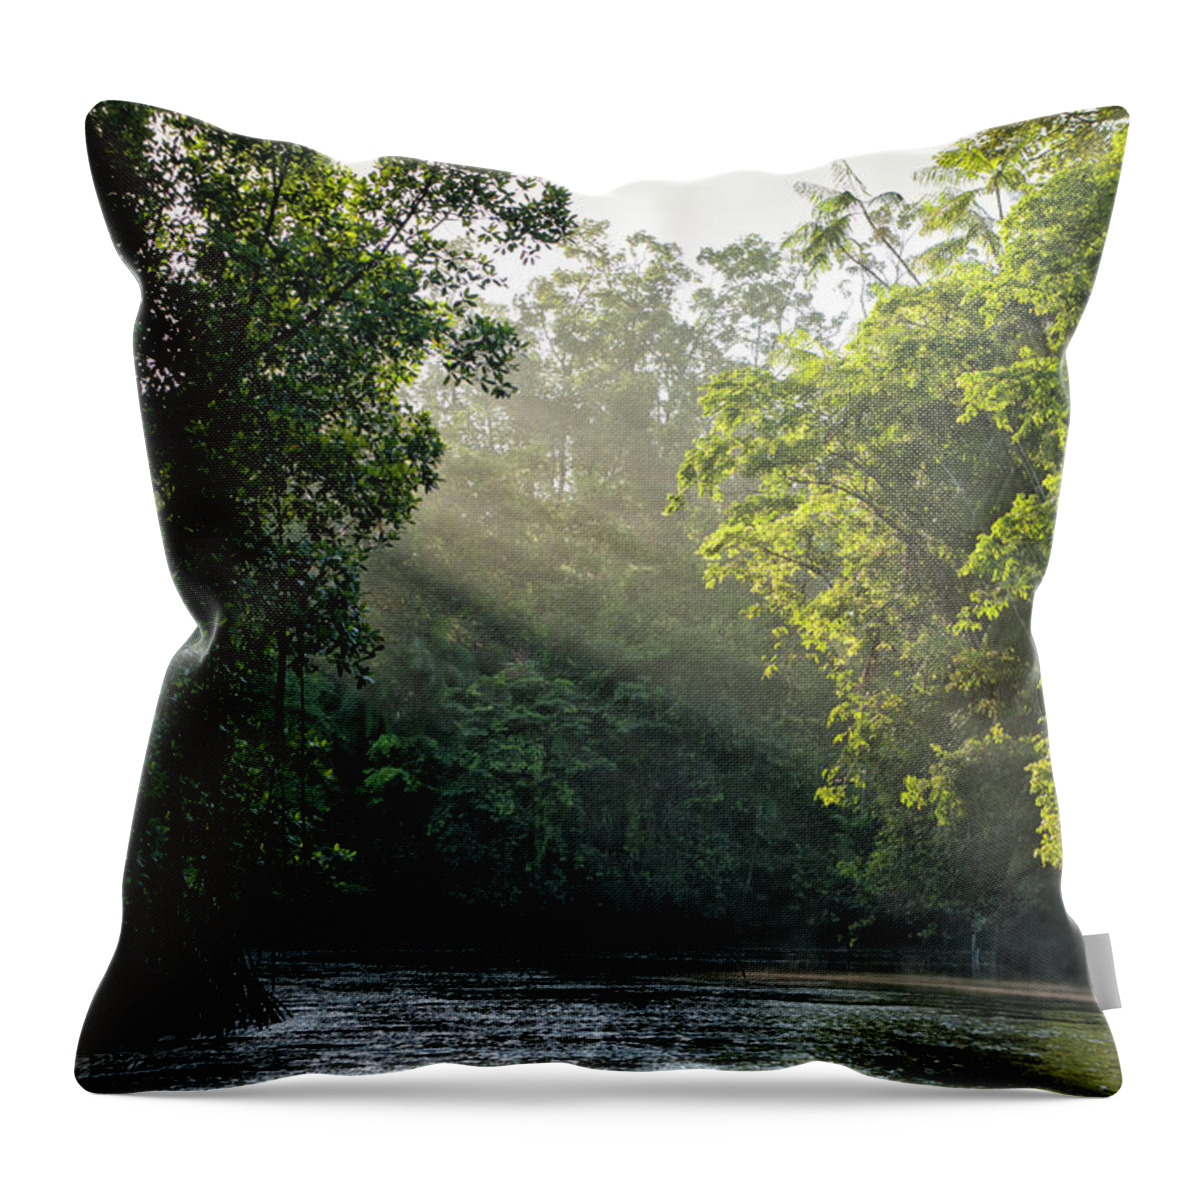 Tropical Rainforest Throw Pillow featuring the photograph Sunlight Shining Through Trees On River by Brasil2